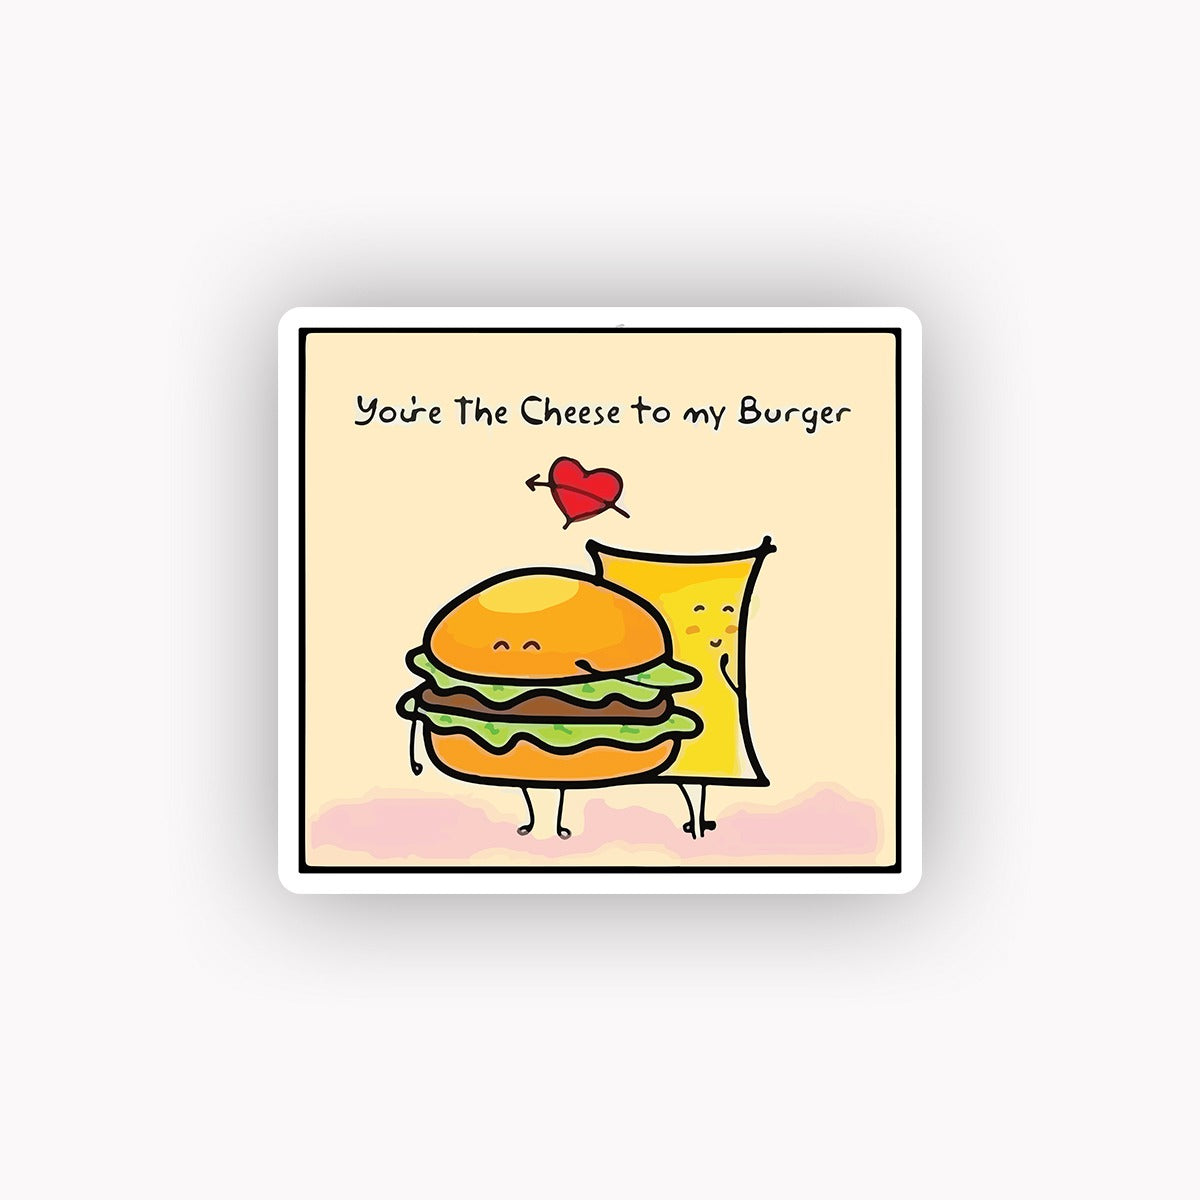 You"re cheese to my burger